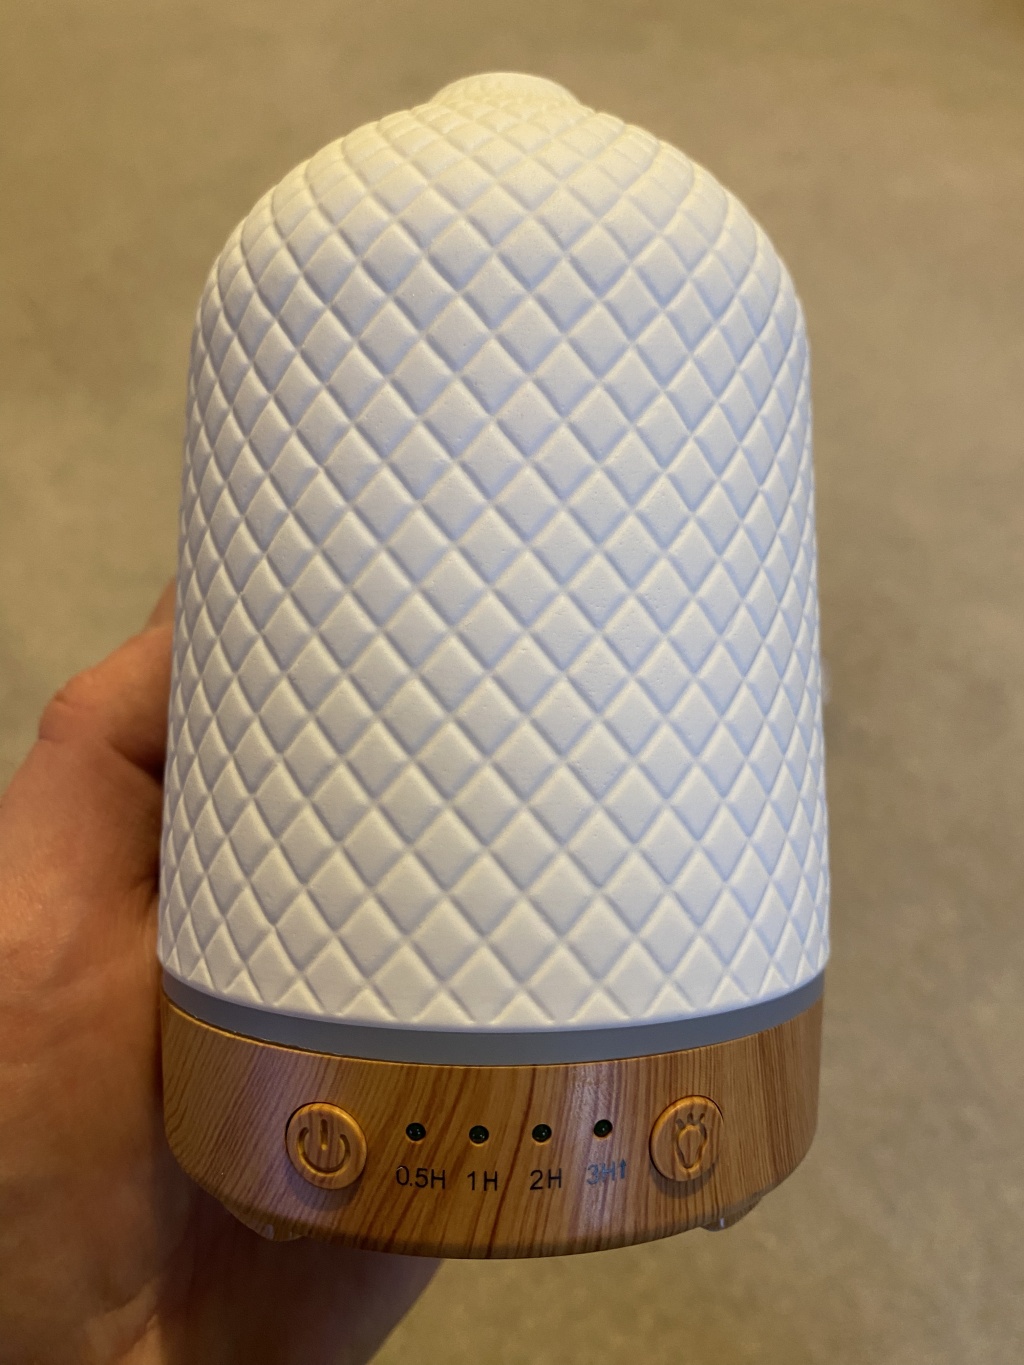 Dialin’s Essential Oil Diffuser: Product Review